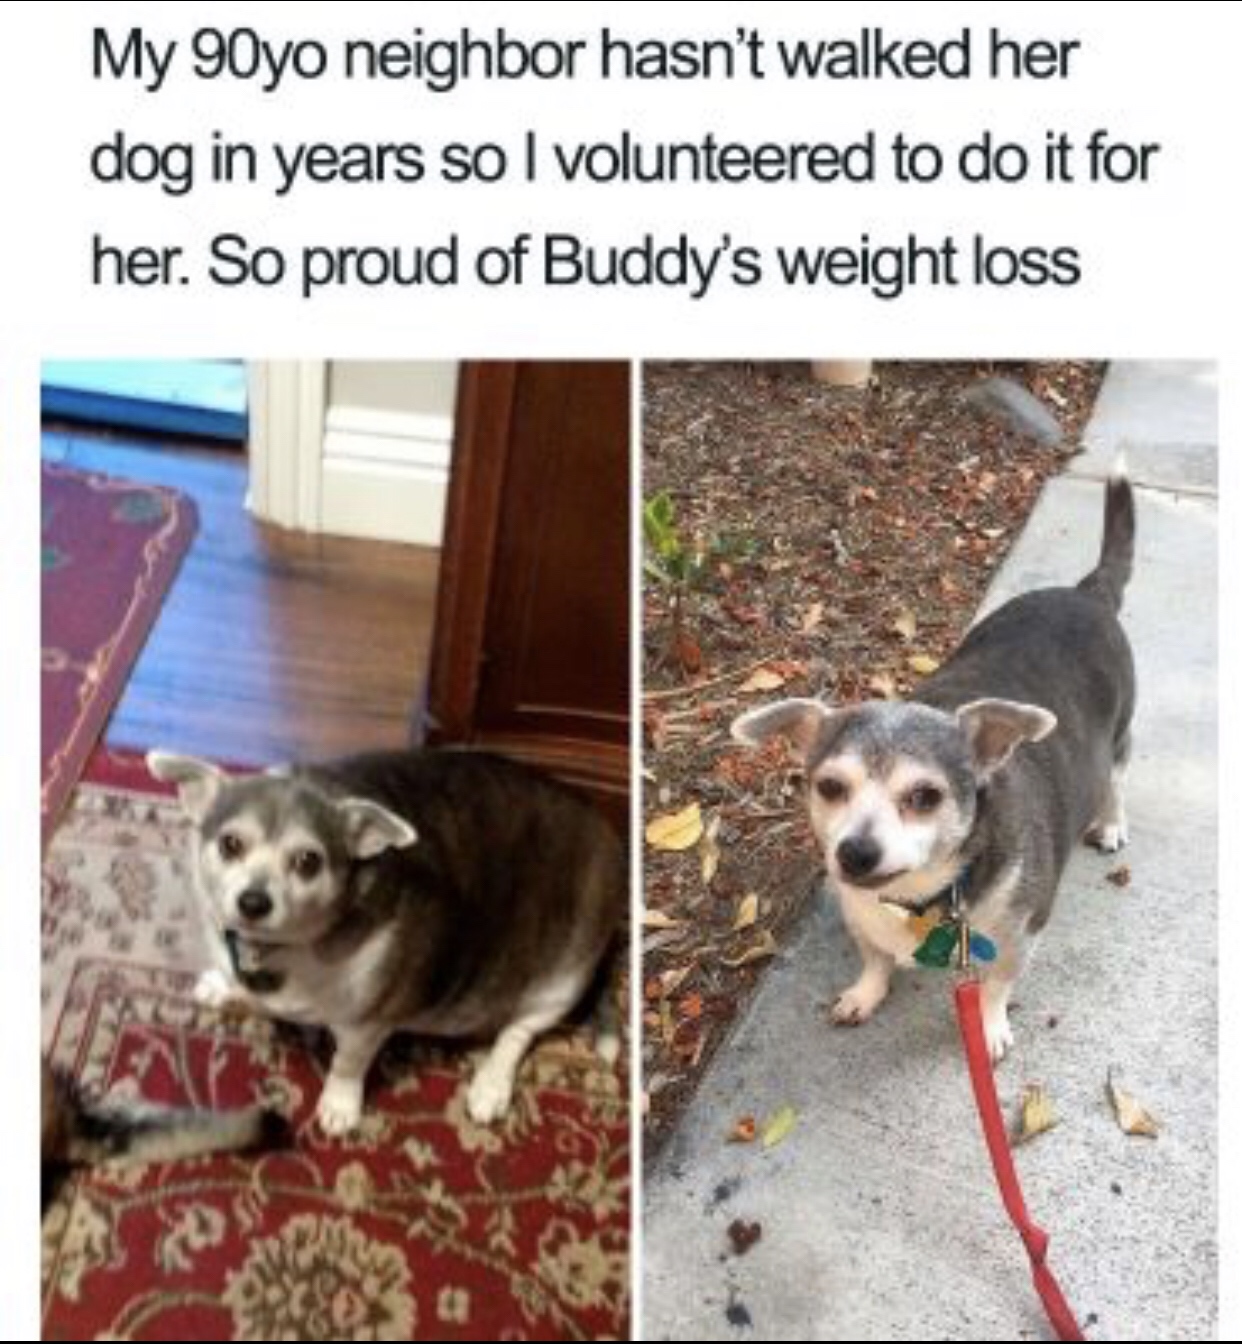 reddit dog - My 90yo neighbor hasn't walked her dog in years so I volunteered to do it for her. So proud of Buddy's weight loss